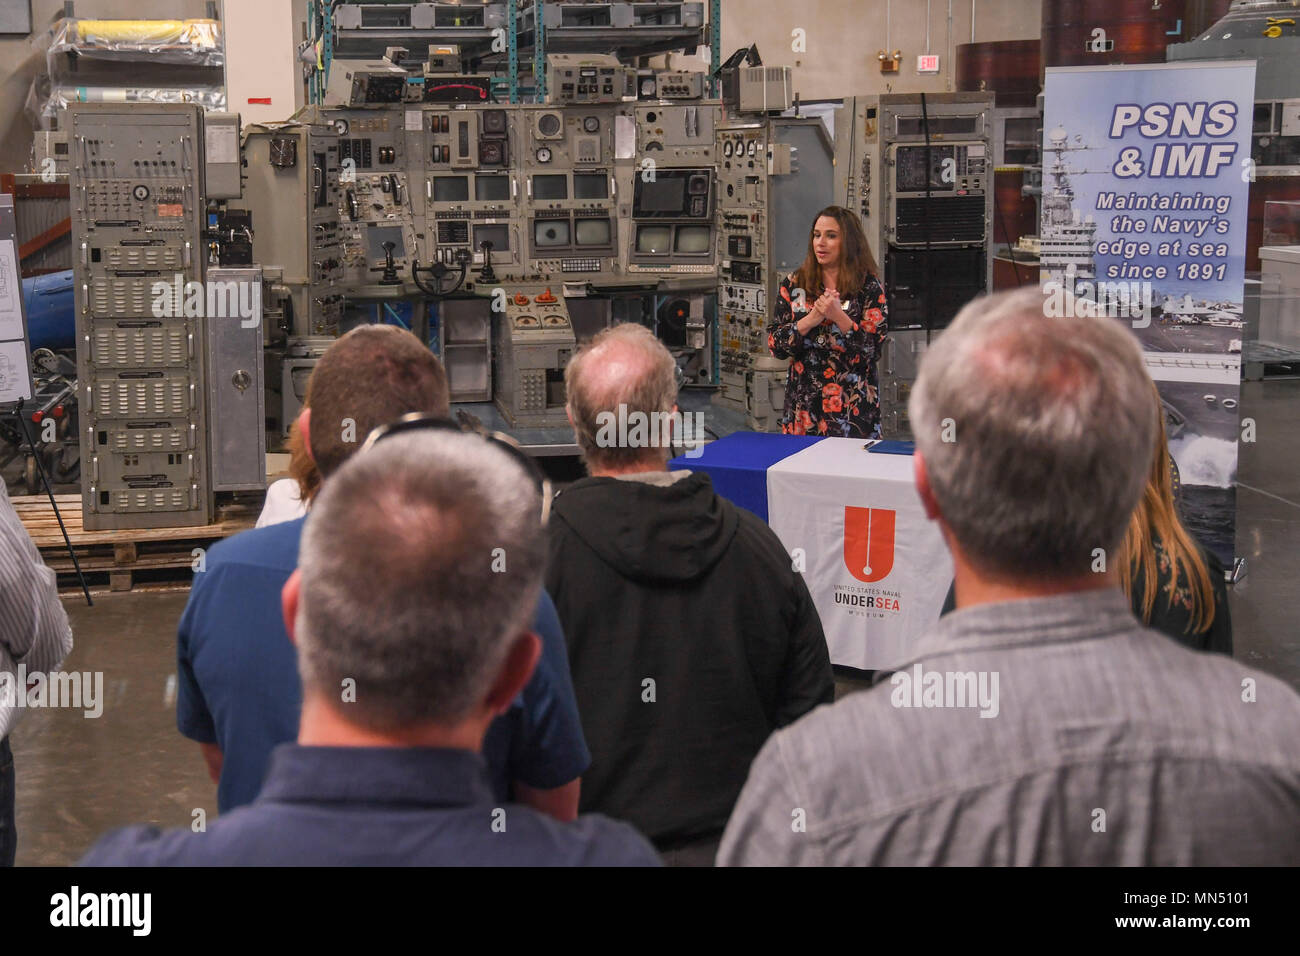 180508-N-VH385-0013 KEYPORT, Wash. (May 8, 2018) - Lindy Dosher, U.S. Naval Undersea Museum director, gives the opening remarks at a ceremony in which the Puget Sound Naval Shipyard and Intermediate Maintenance Facility donated the control room of the experimental nuclear research submarine, NR-1, to the museum. The control room was removed from NR-1 during the recycling process at the shipyard and reassembled for transfer to the museum. Launched on Jan. 25, 1969, NR-1 was the only nuclear-powered research submarine ever built, and carried out classified and unclassified operations for almost  Stock Photo